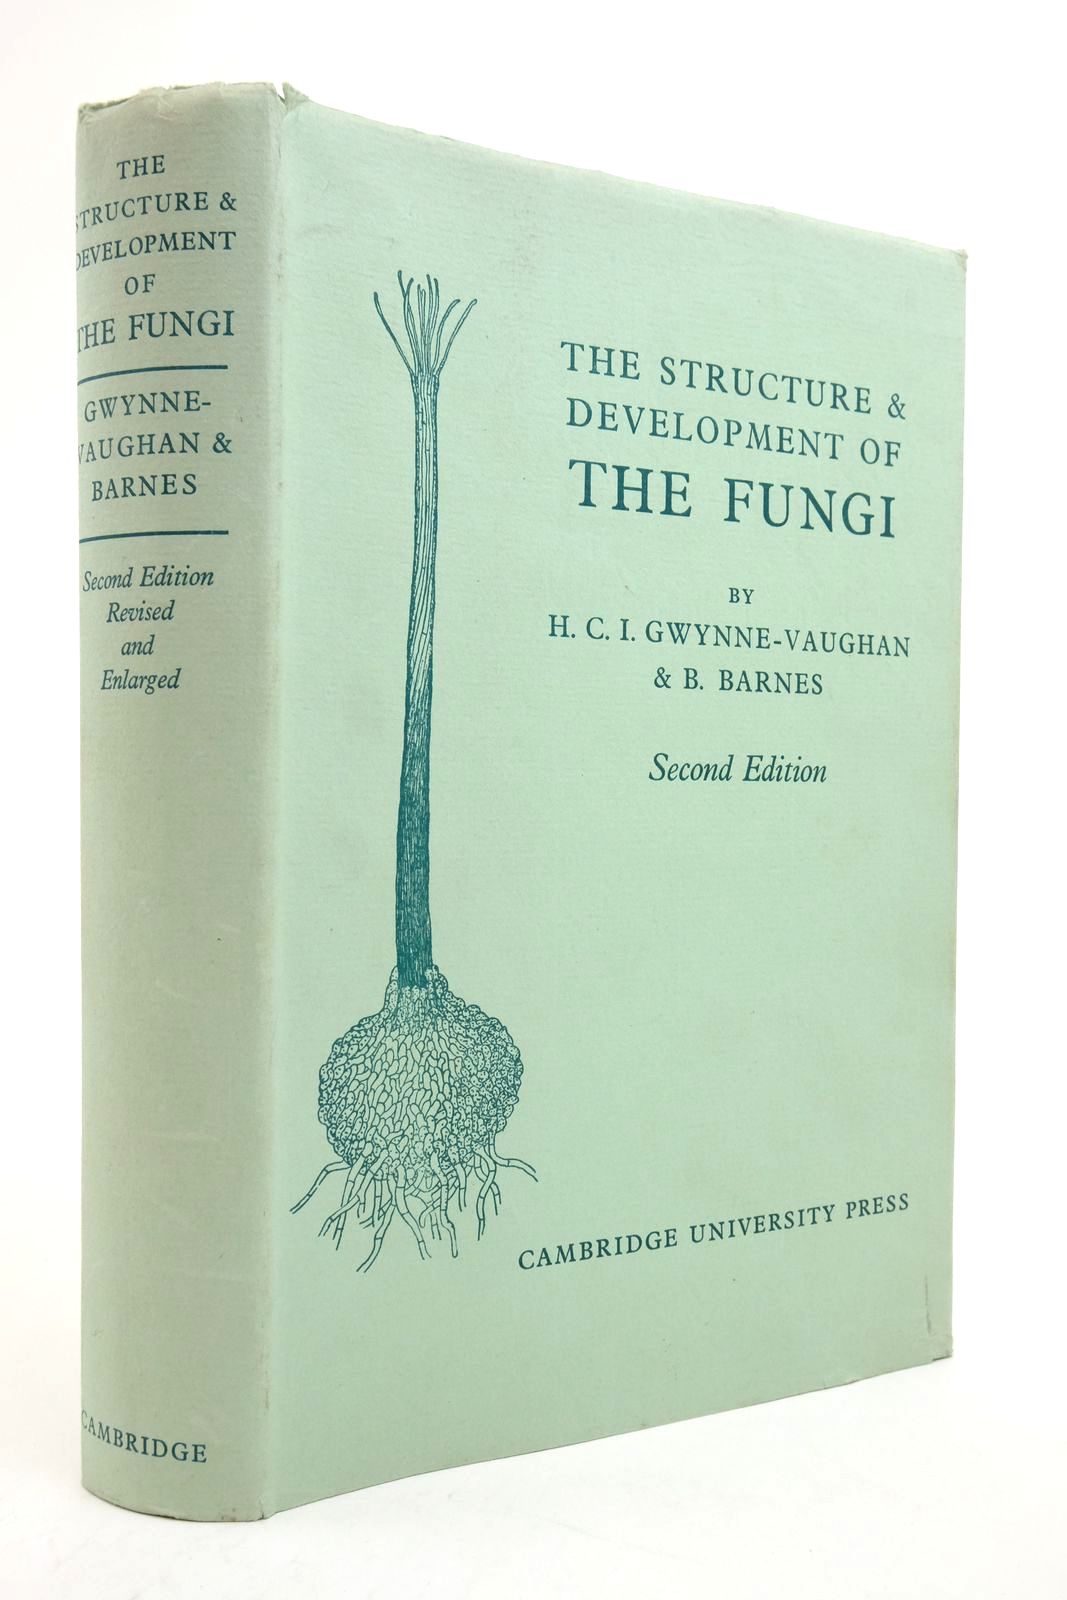 Photo of THE STRUCTURE AND DEVELOPMENT OF THE FUNGI written by Gwynne-Vaughan, H.C.I. Barnes, B. published by Cambridge University Press (STOCK CODE: 2138677)  for sale by Stella & Rose's Books